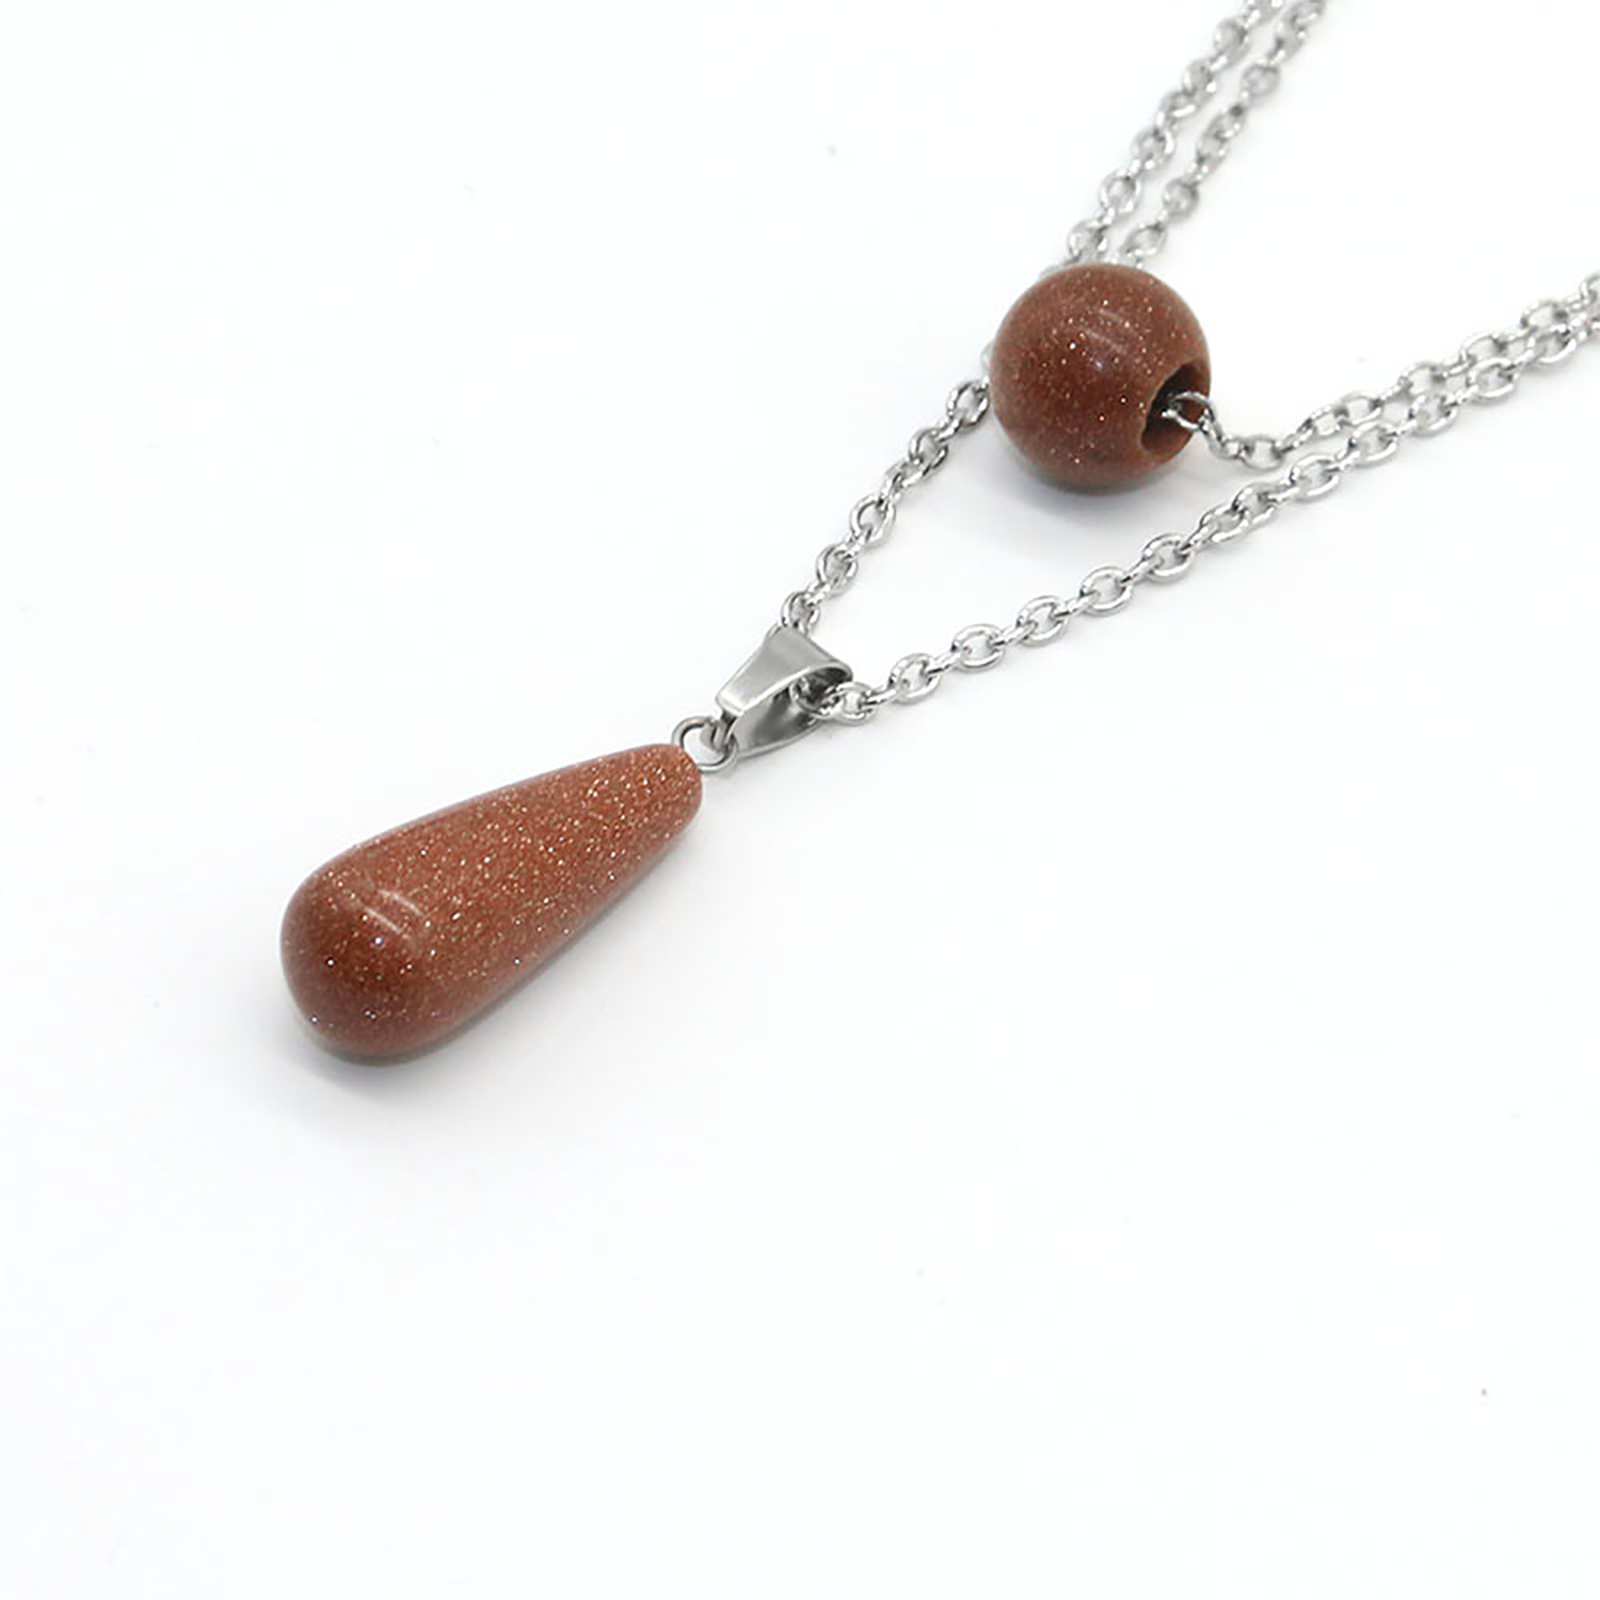 1:The pendant is about 10mm long, about 20mm high, and the double-layer necklace chain is about 50cm long